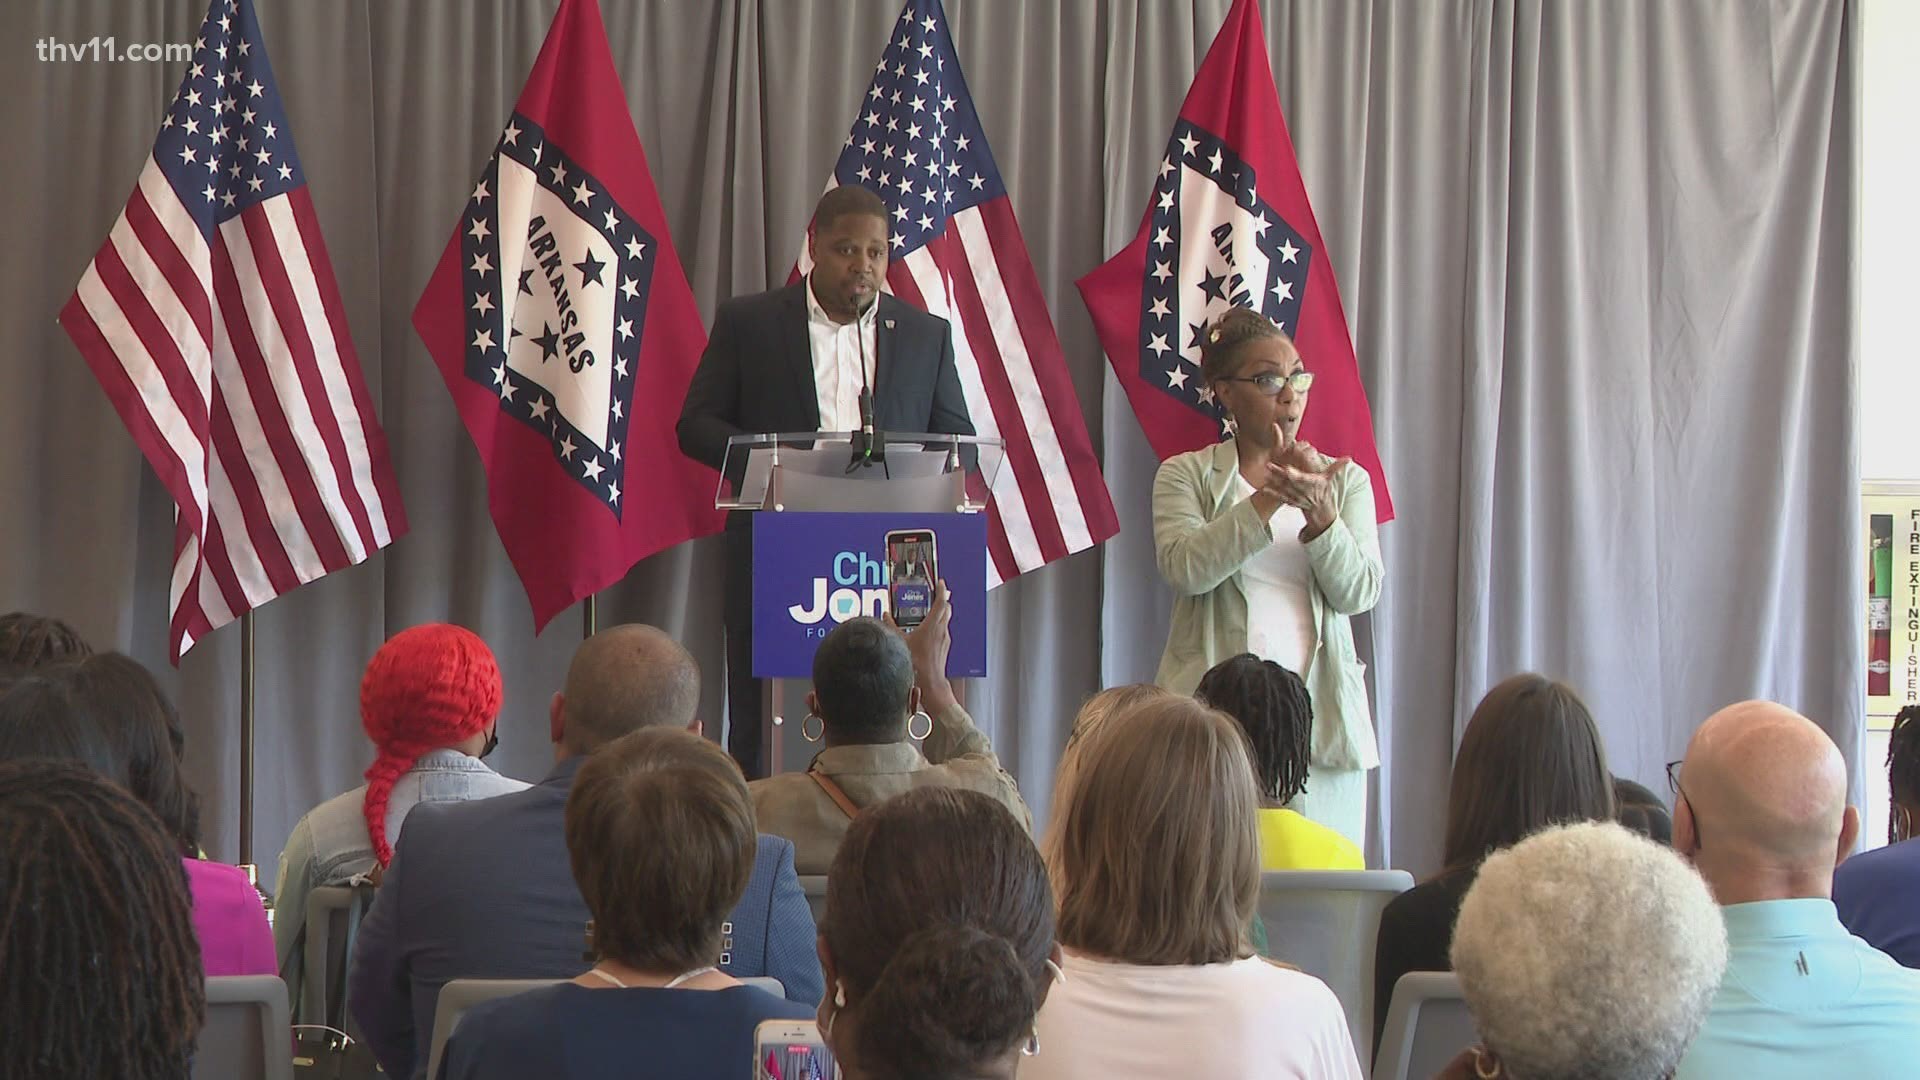 The Pine Bluff native announced his candidacy for governor of Arkansas on Tuesday.